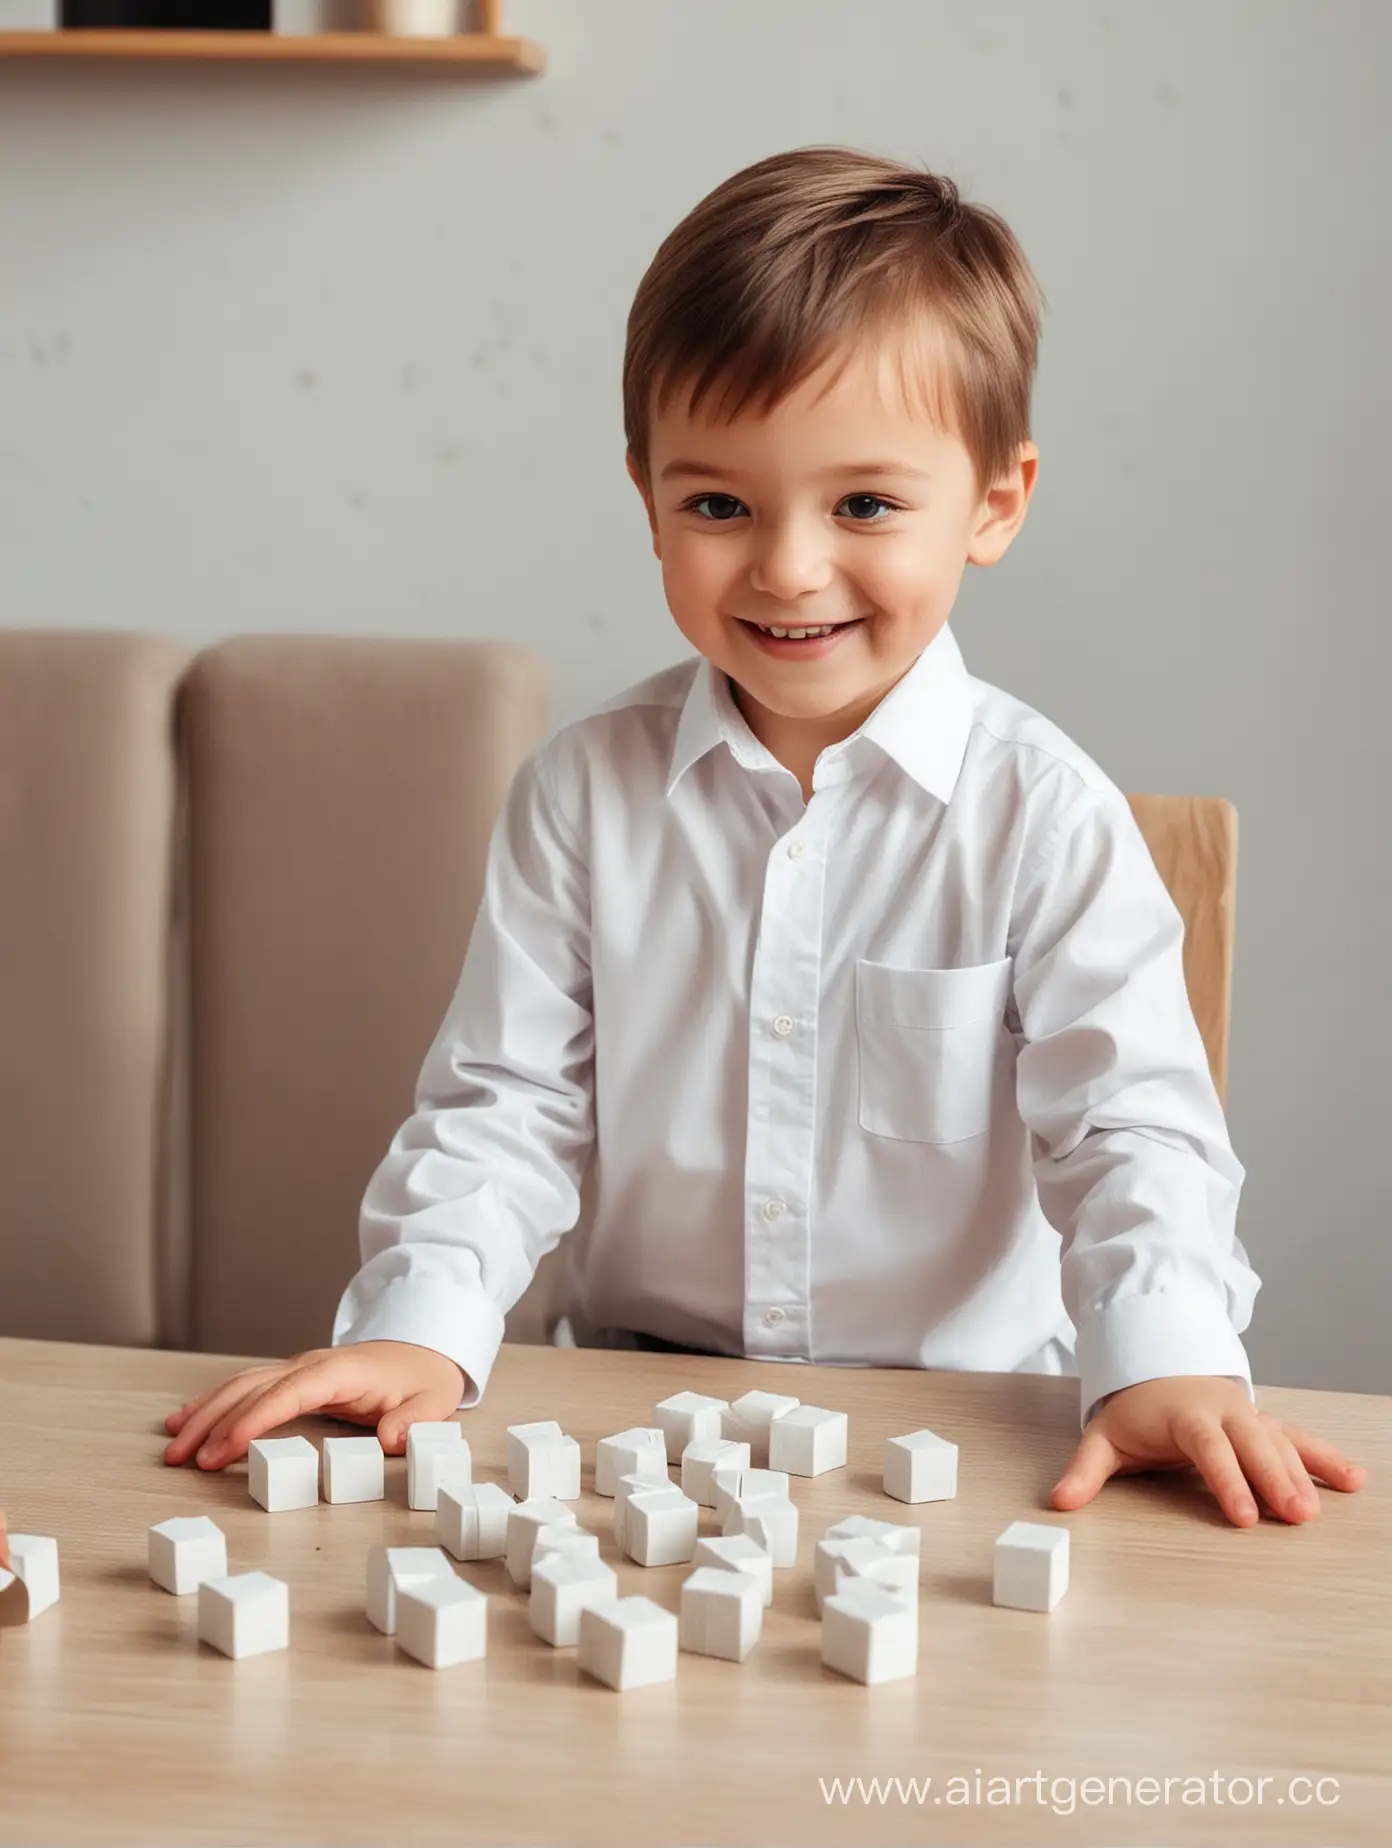 Cheerful-Boy-Playing-with-White-Cubes-Joyful-Child-Engages-in-Educational-Activity